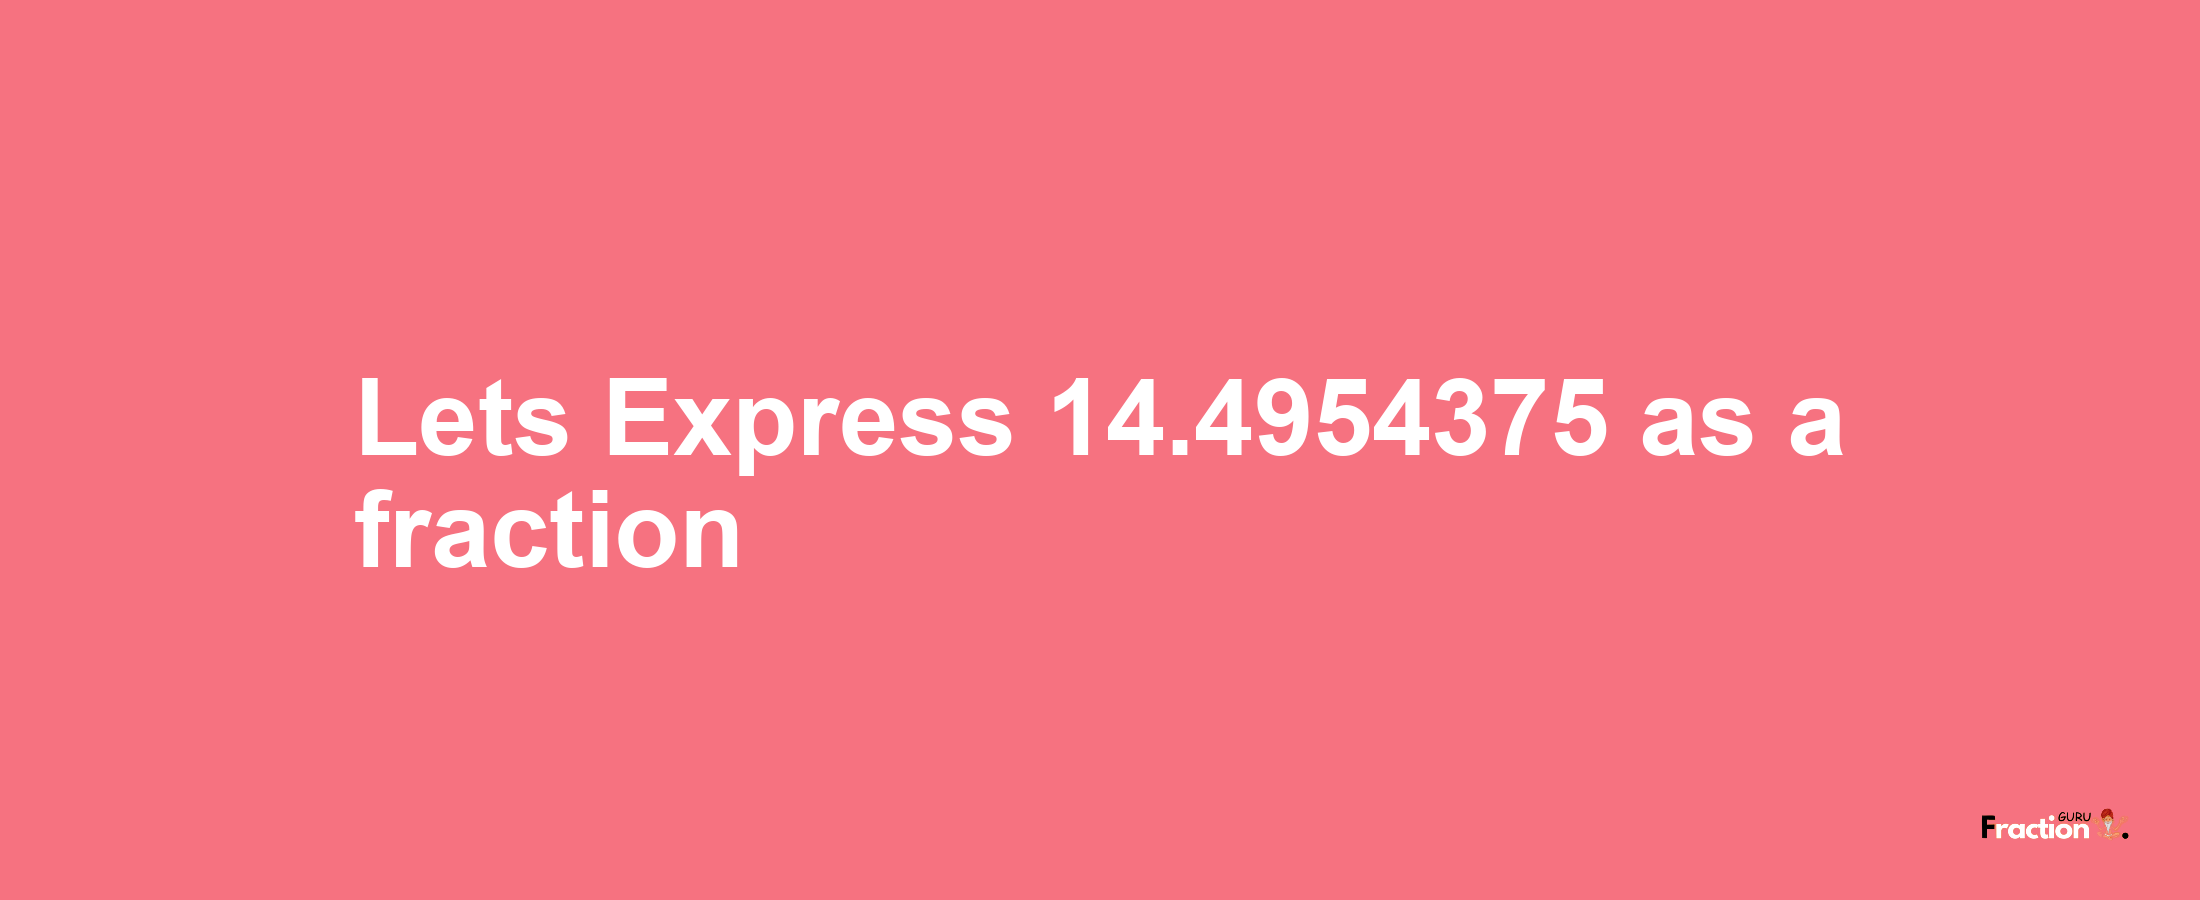 Lets Express 14.4954375 as afraction